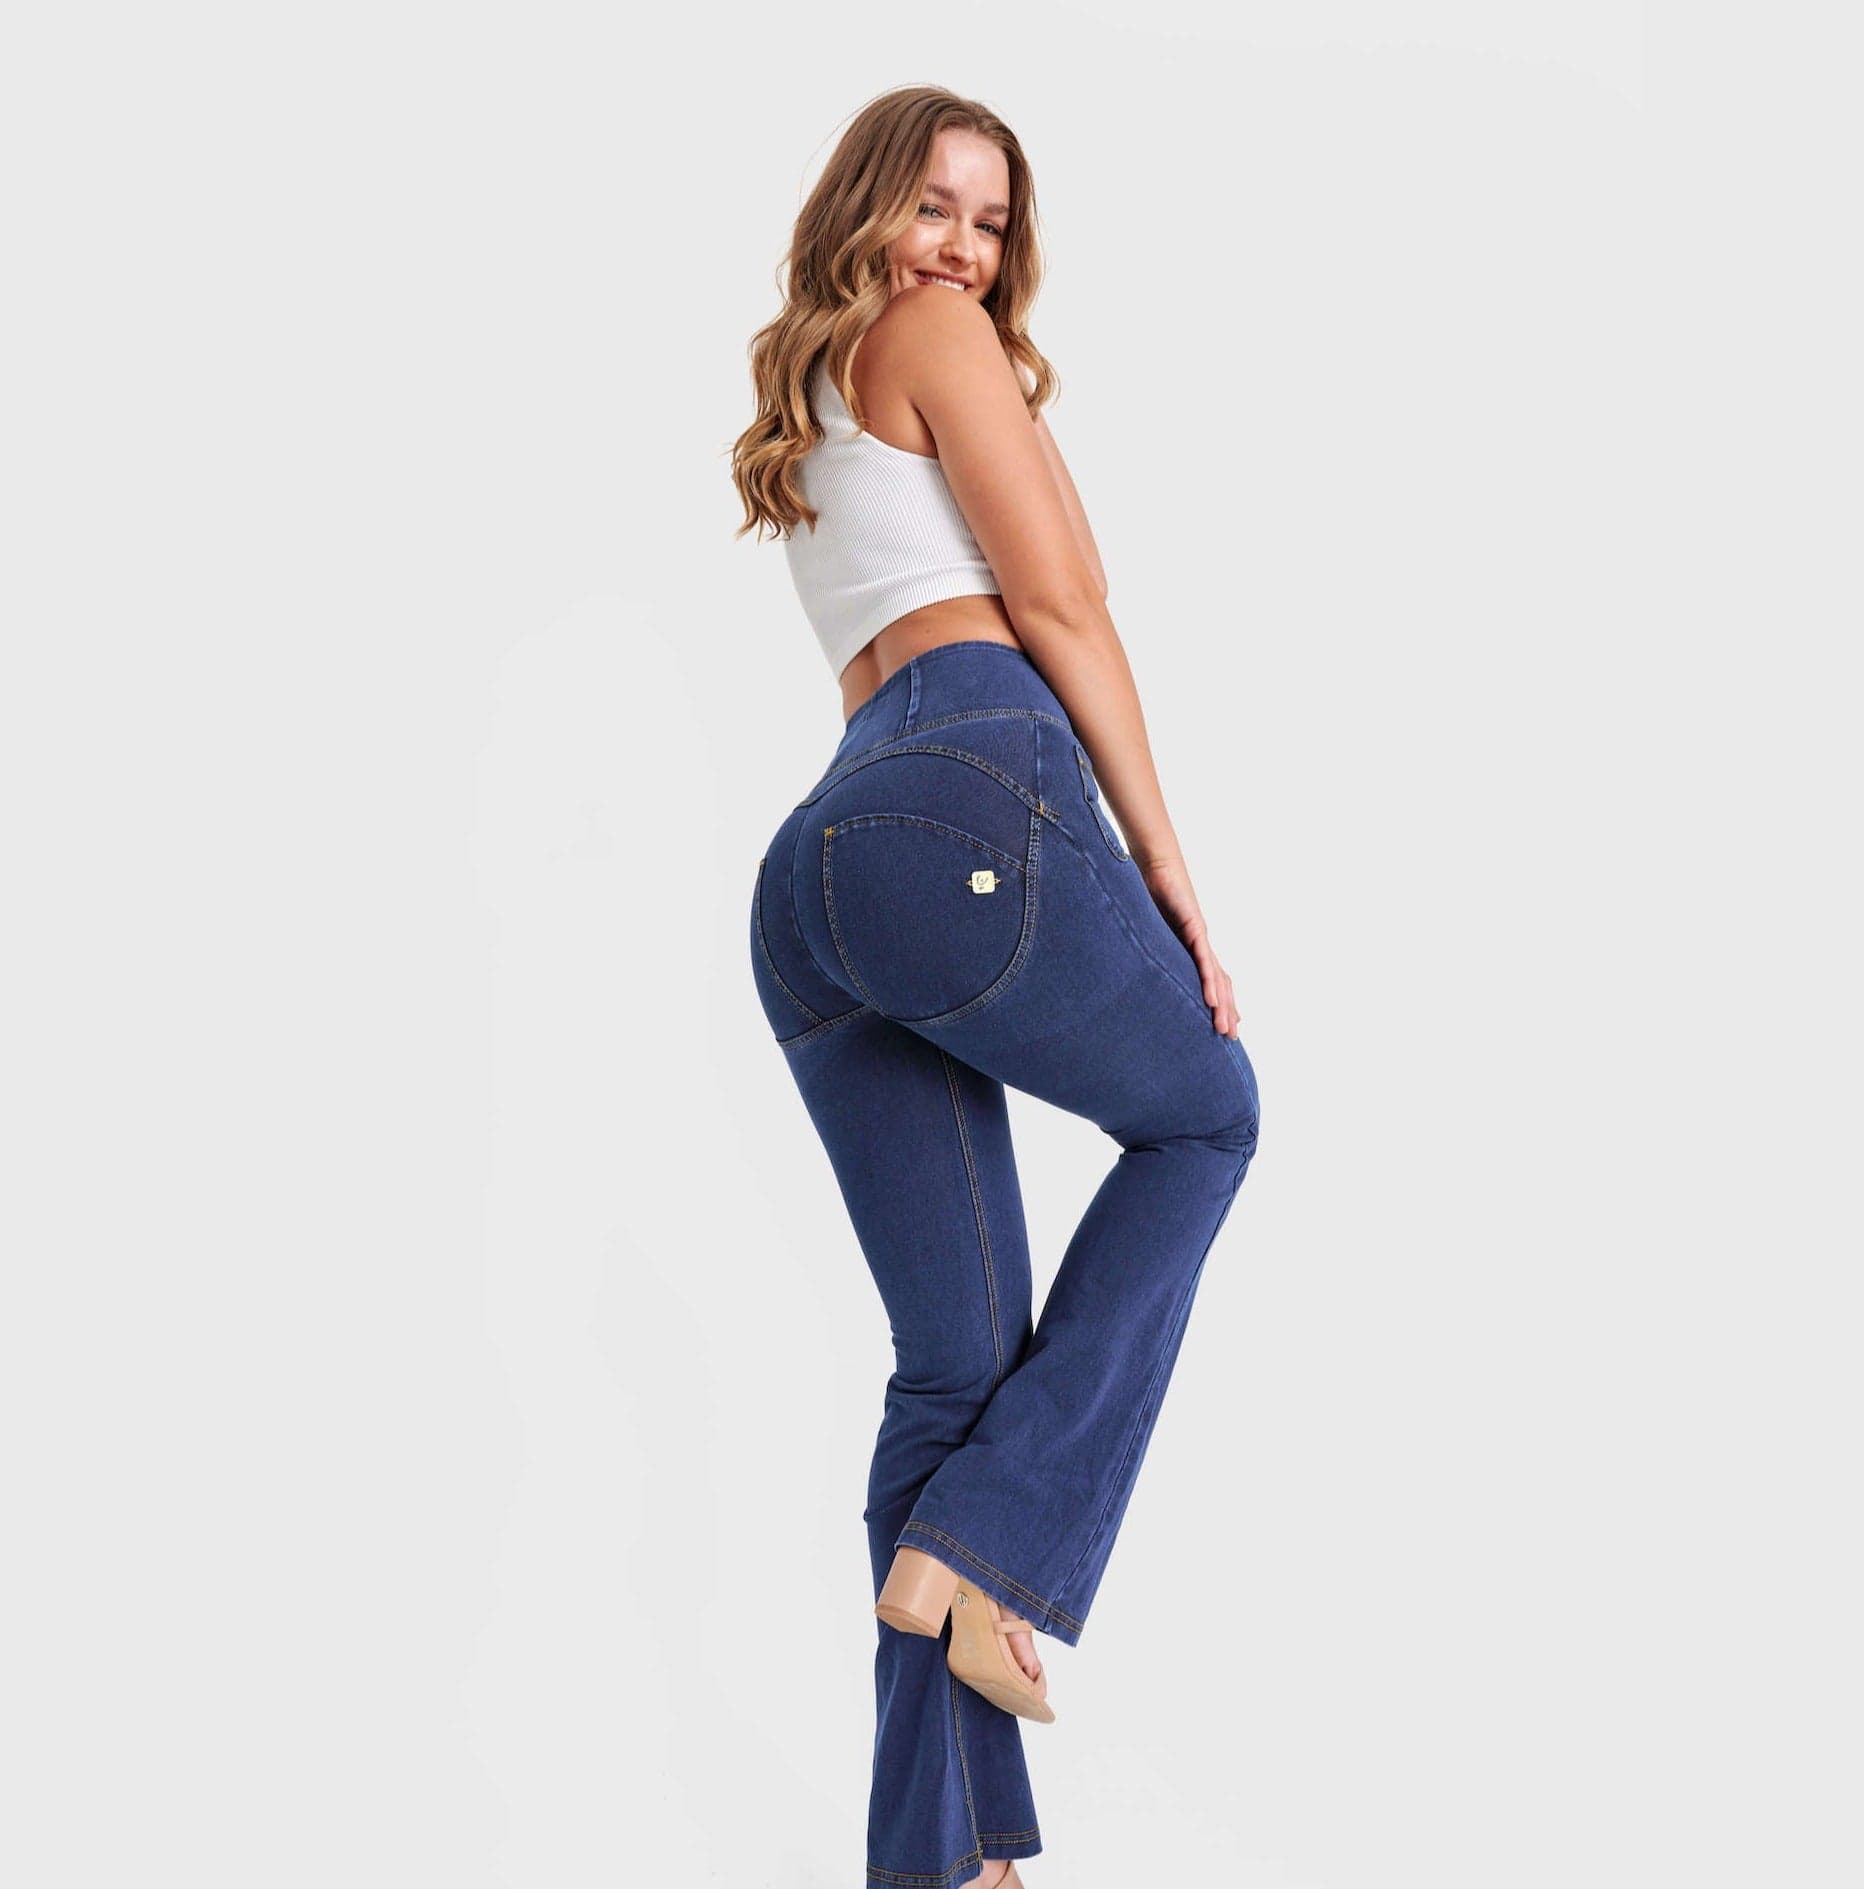 WR.UP® Denim with Front Pockets - Super High Waisted - Flare - Dark Blue + Yellow Stitching 2